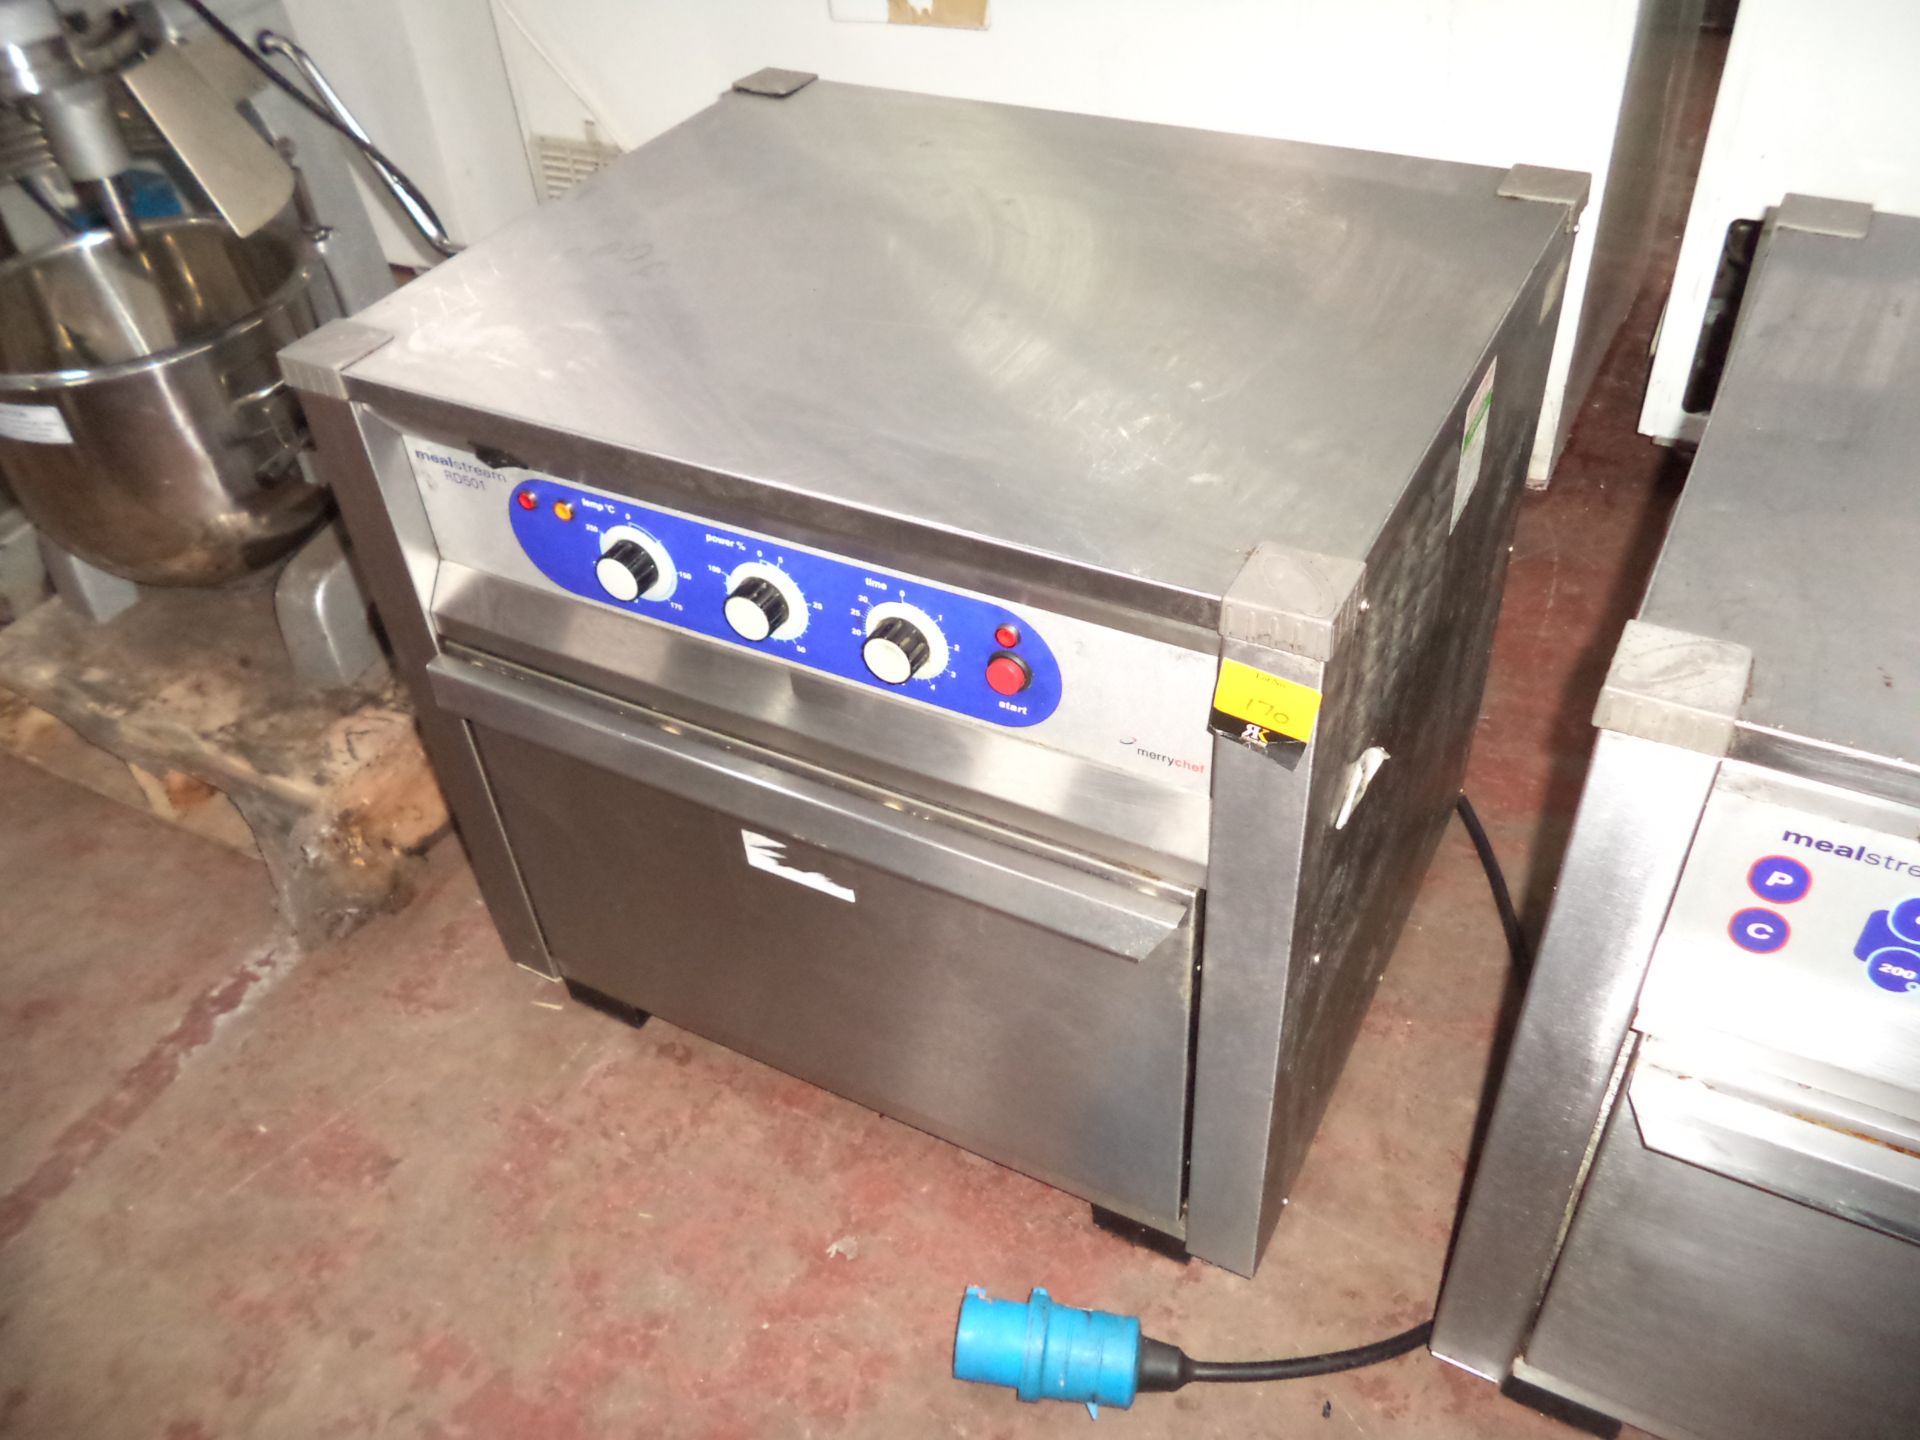 Merrychef Mealstream RD501 multifunction oven IMPORTANT: Please remember goods successfully bid upon